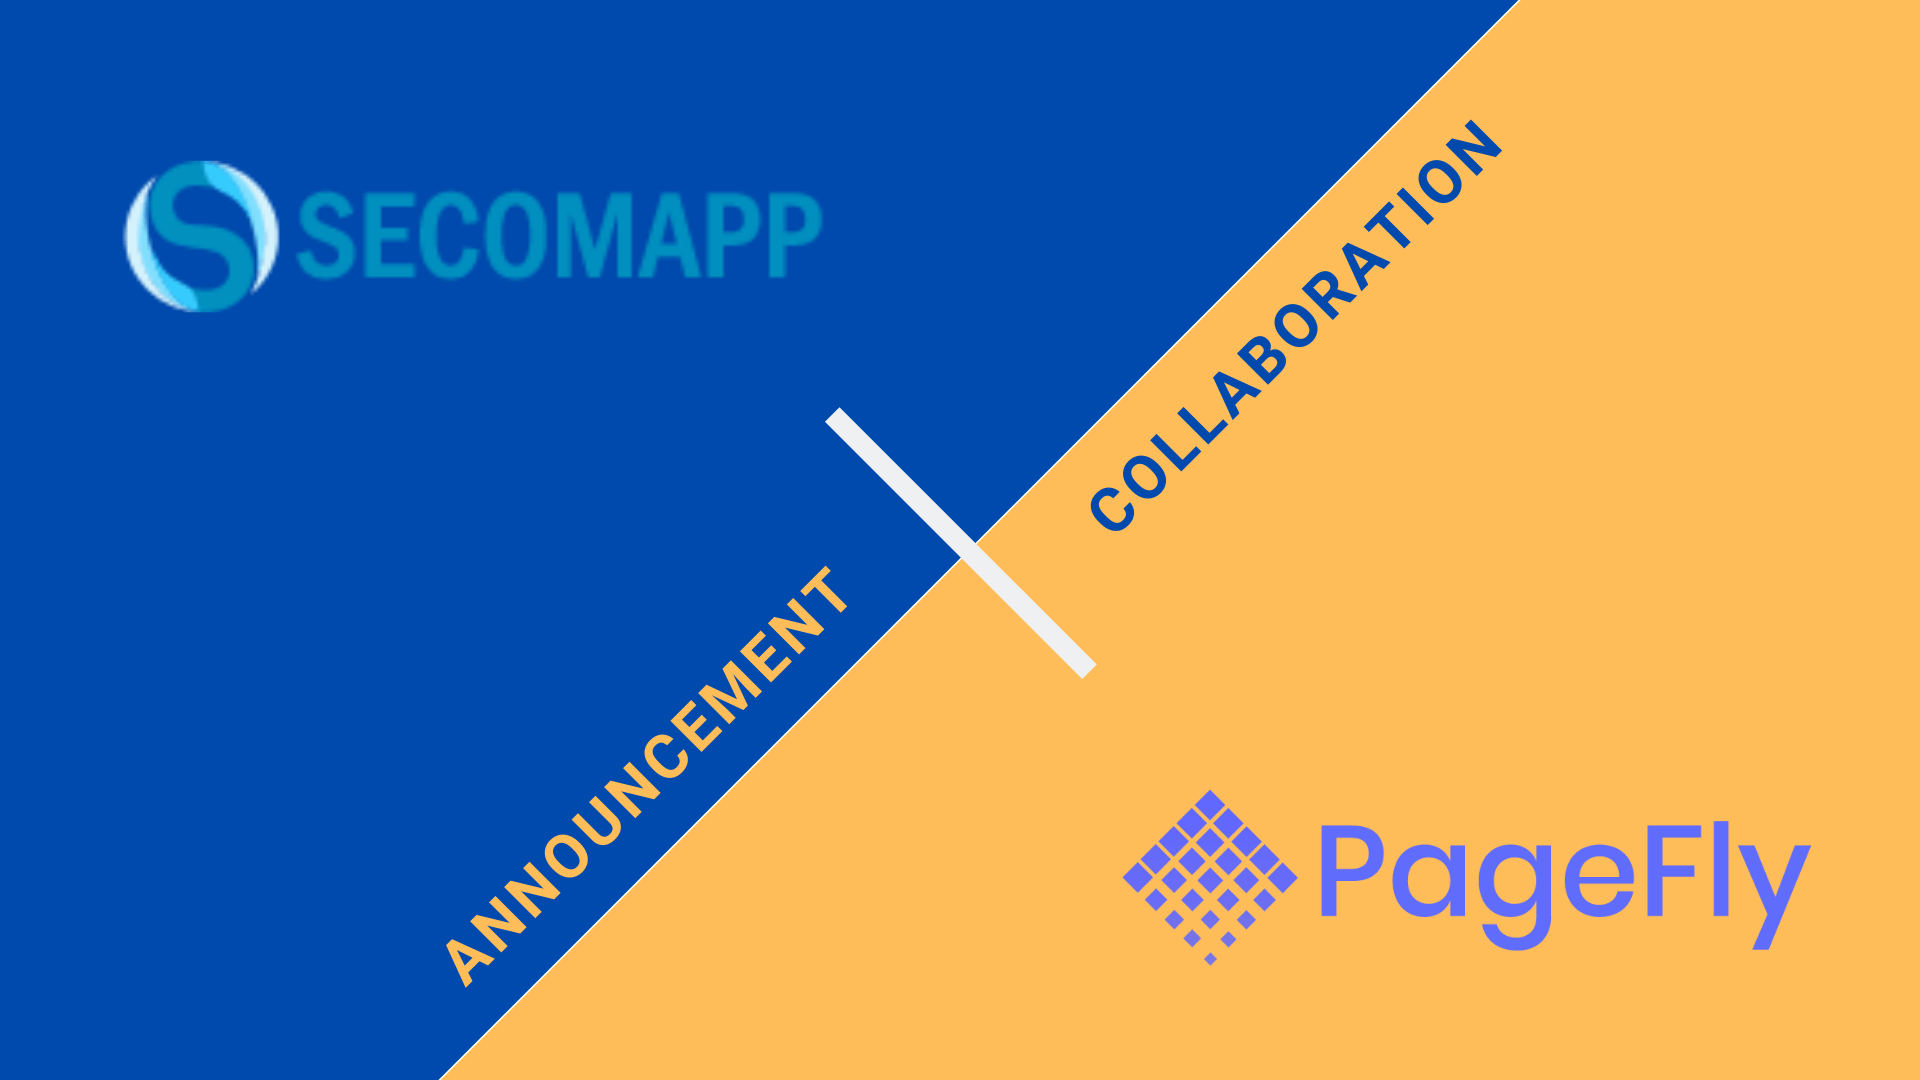 Secomapp's collaboration with Pagefly